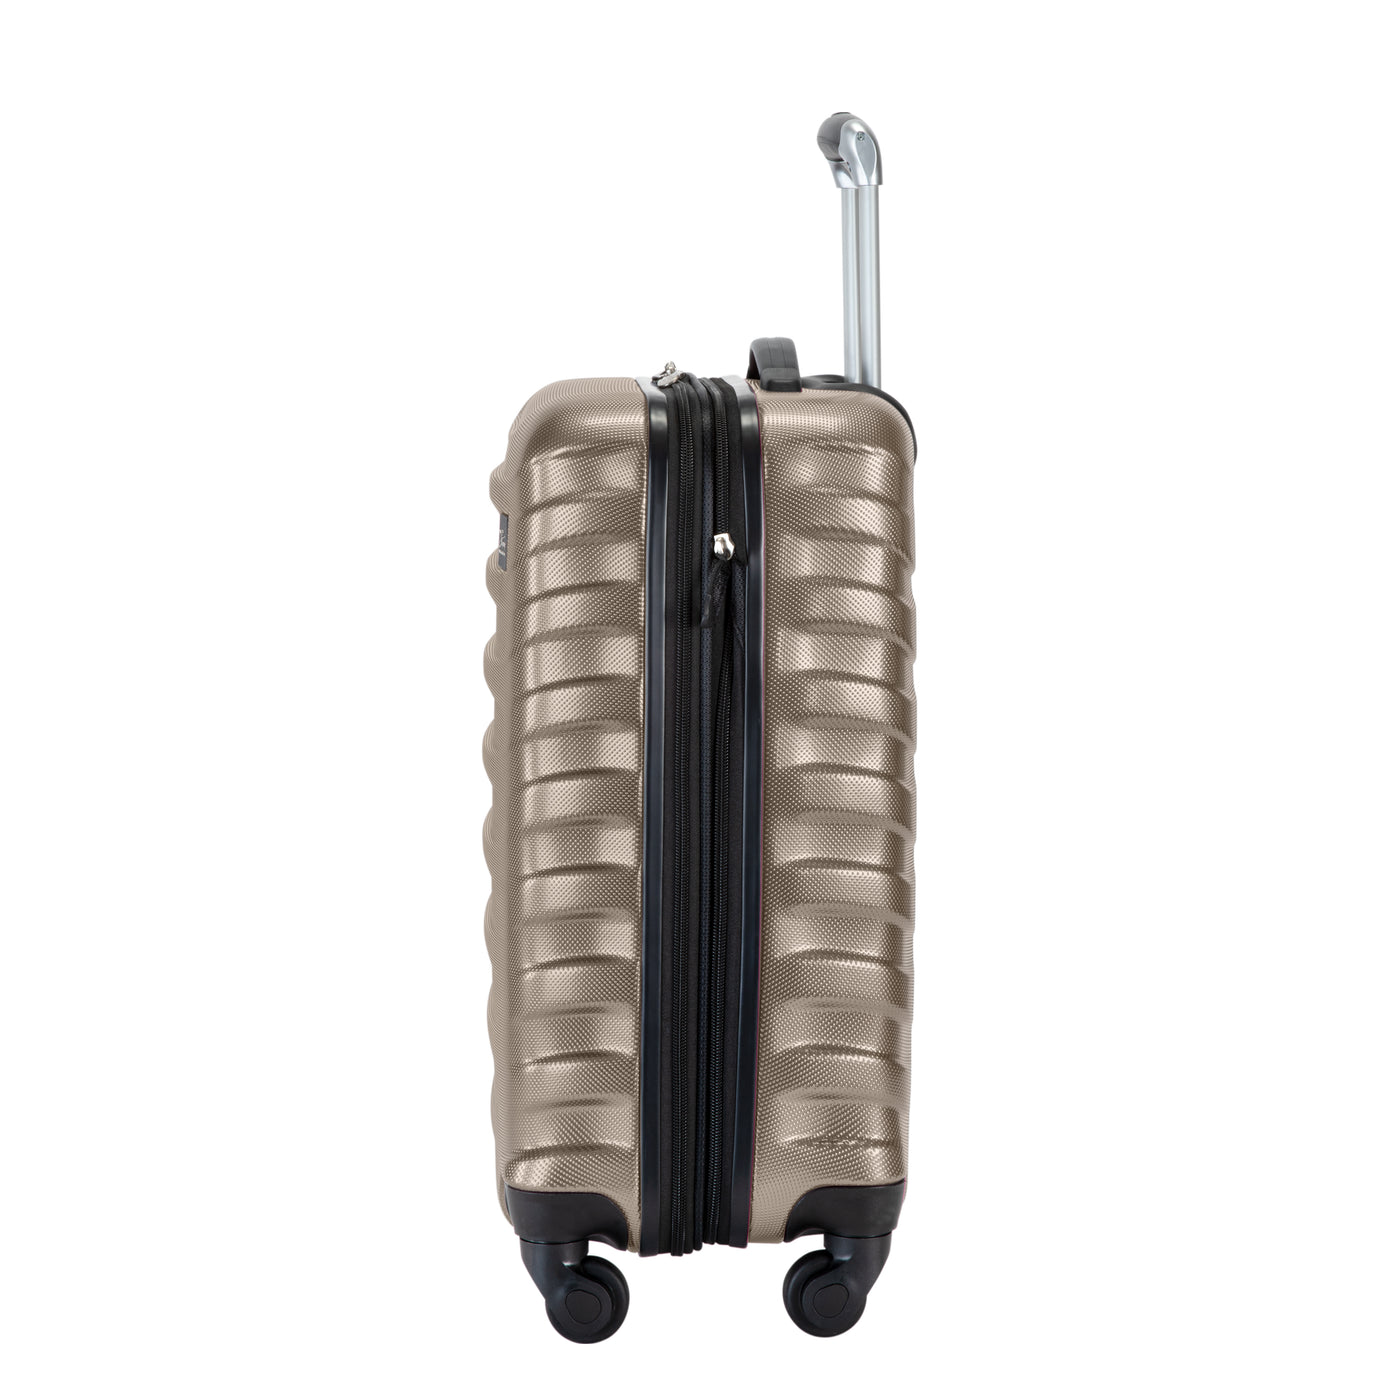 Tanner 3 Piece Set - Carry-On, Medium Check-In, and Large Check-In